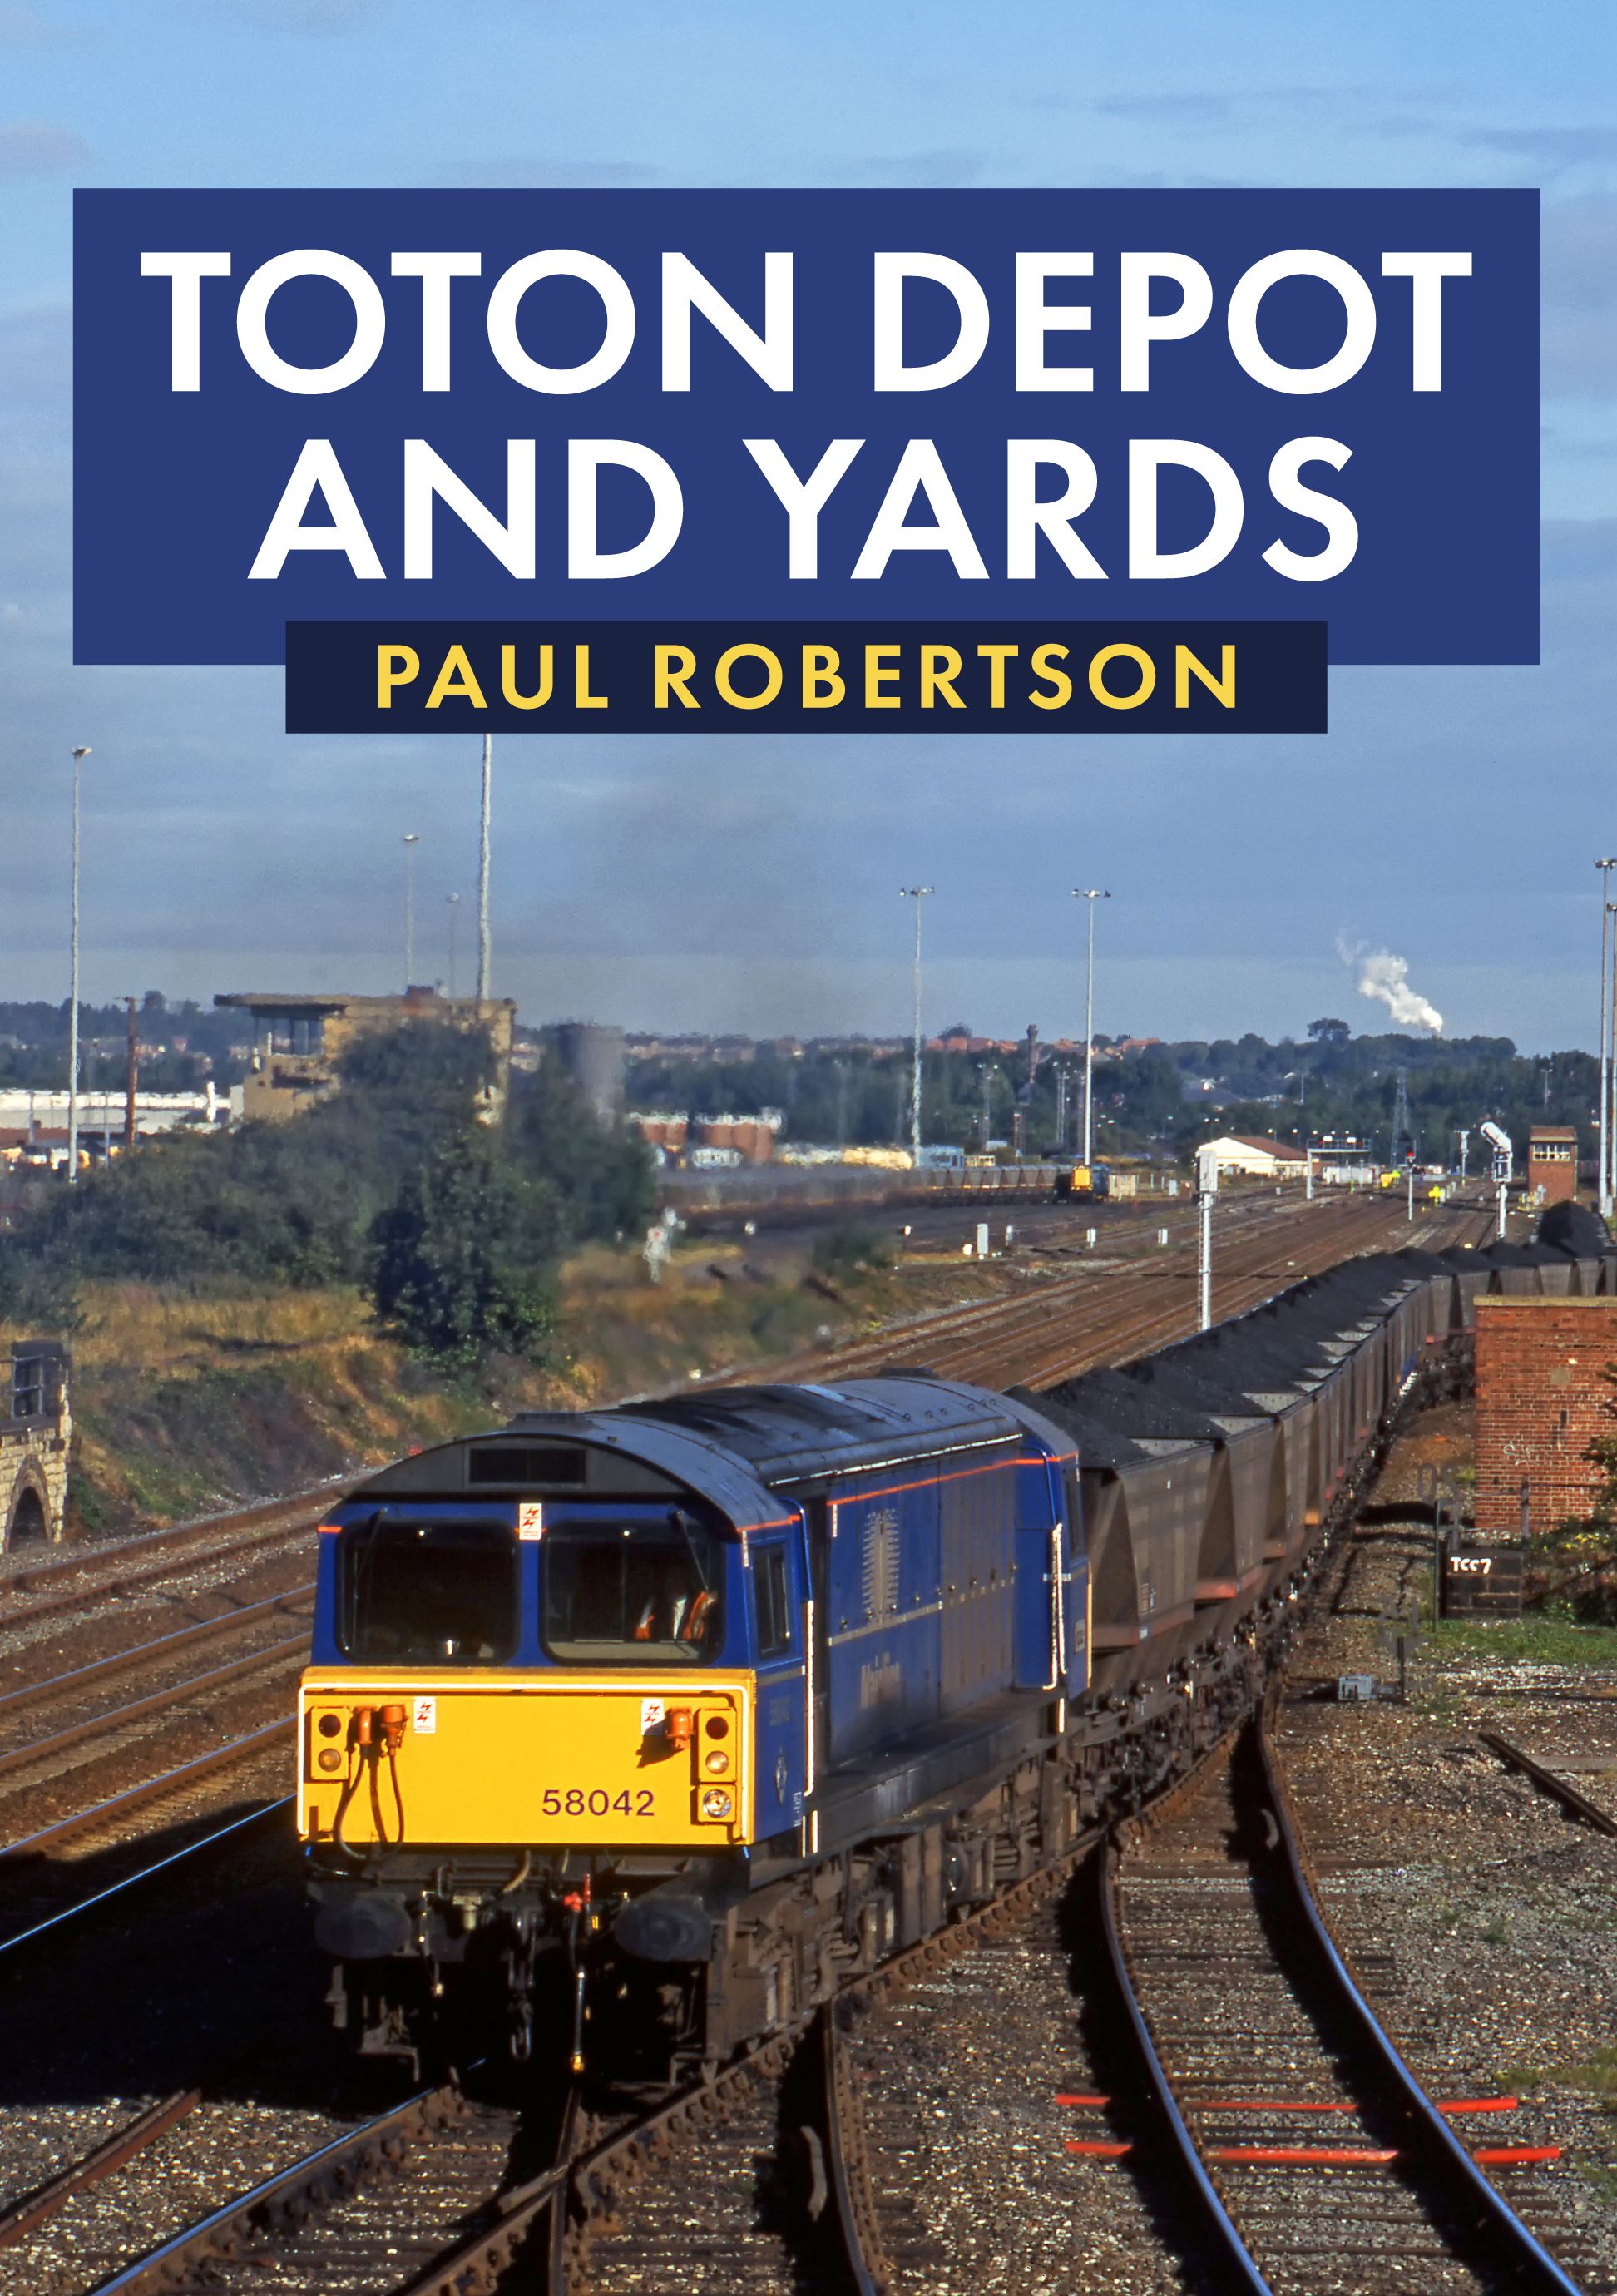 Toton Depot and Yards - Paul Robertson - Chester Model Centre